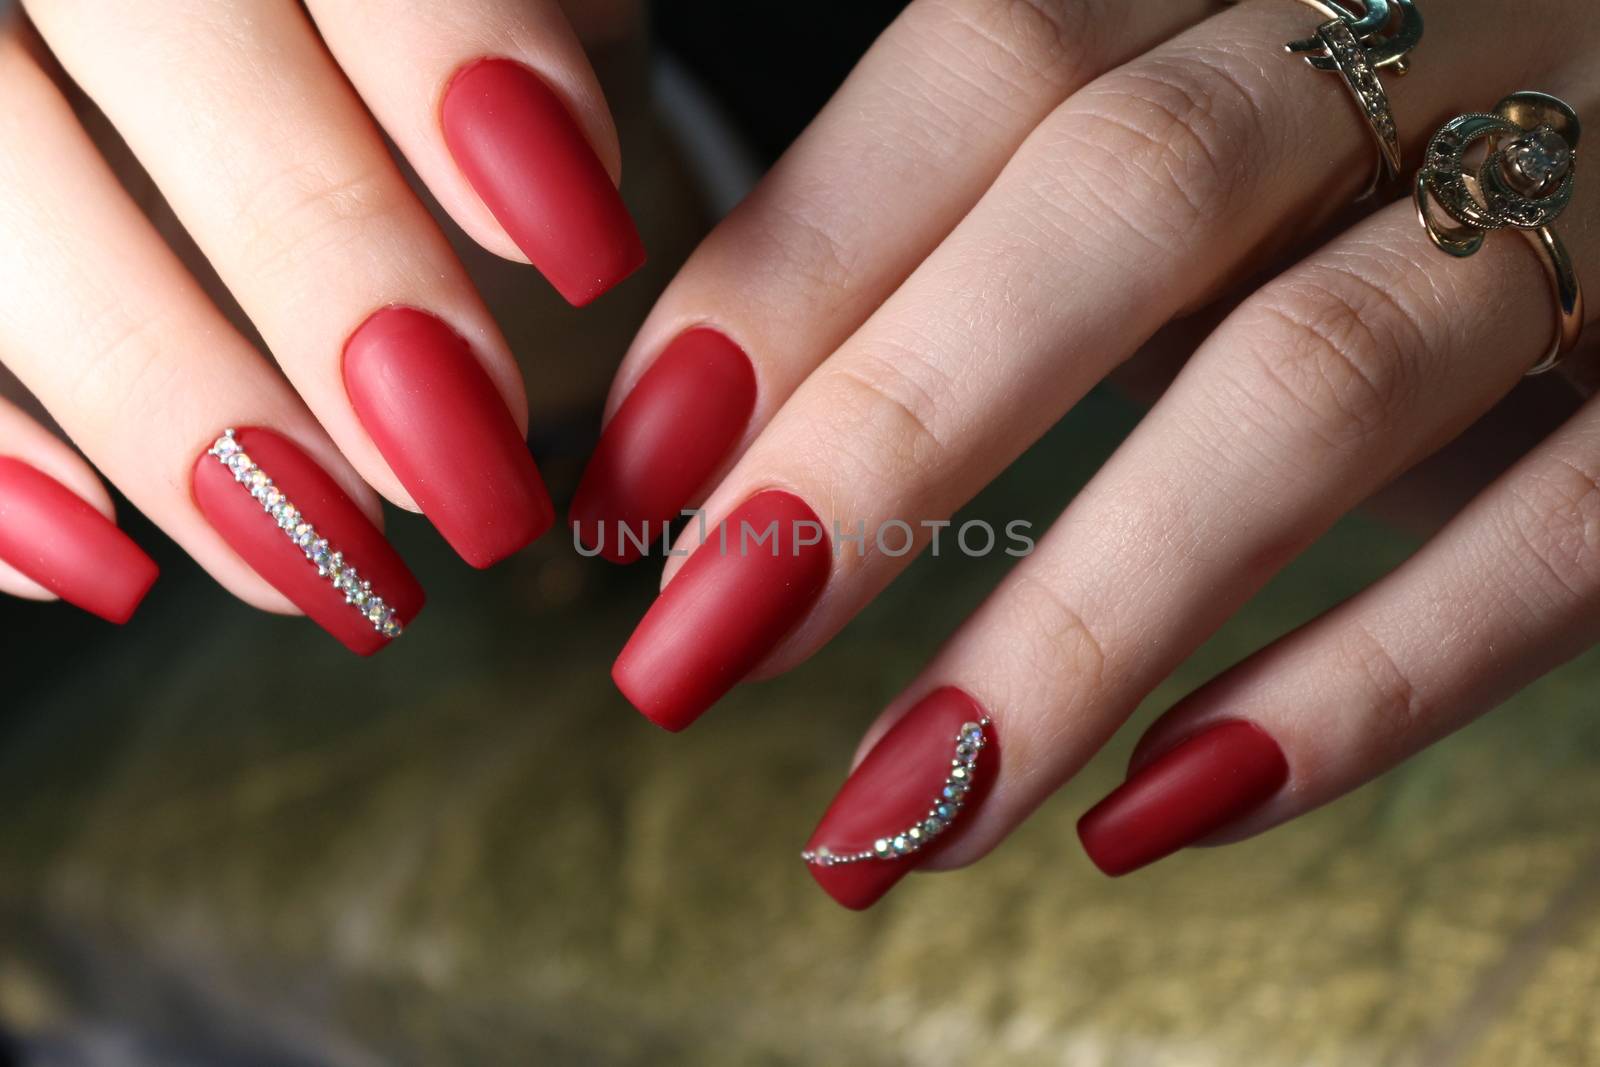 Cute manicure on female hands. Woman hands